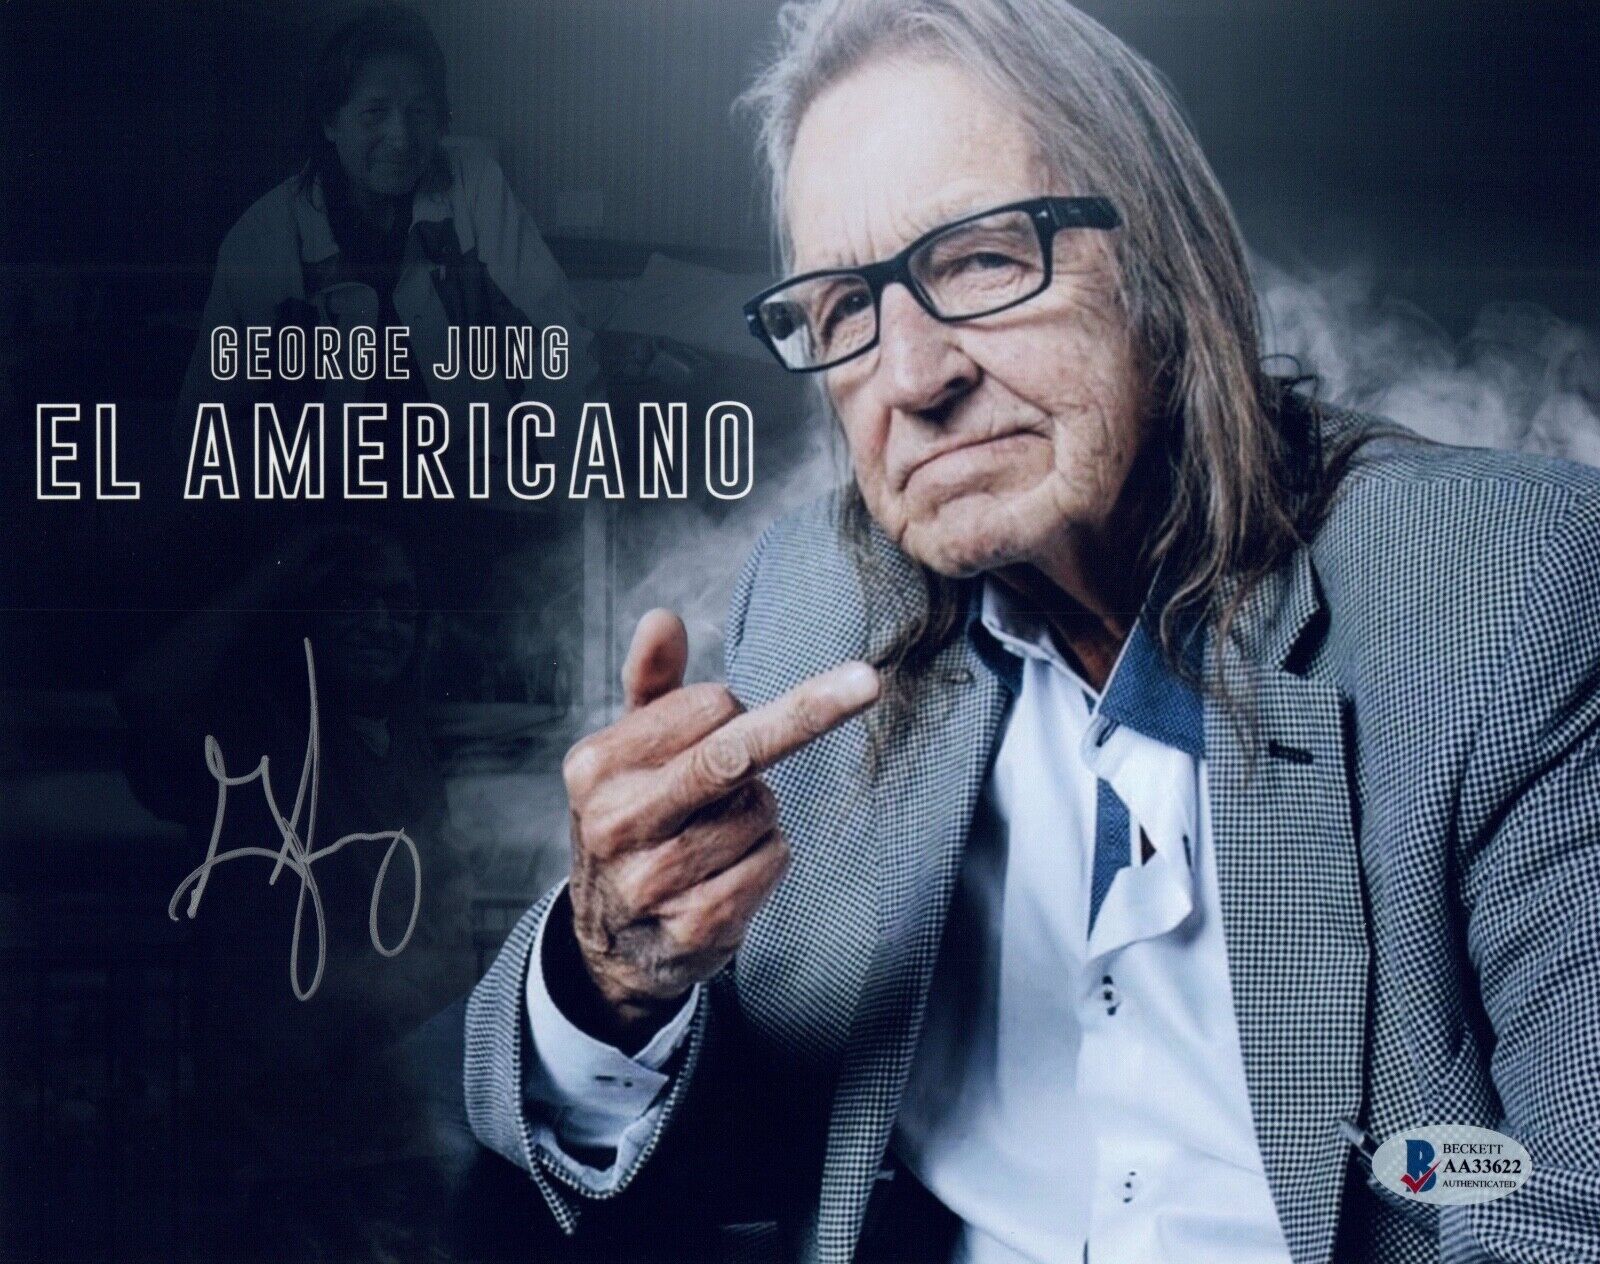 George Jung Signed Autographed 8x10 Photo Poster painting Blow Movie El Americano Beckett COA